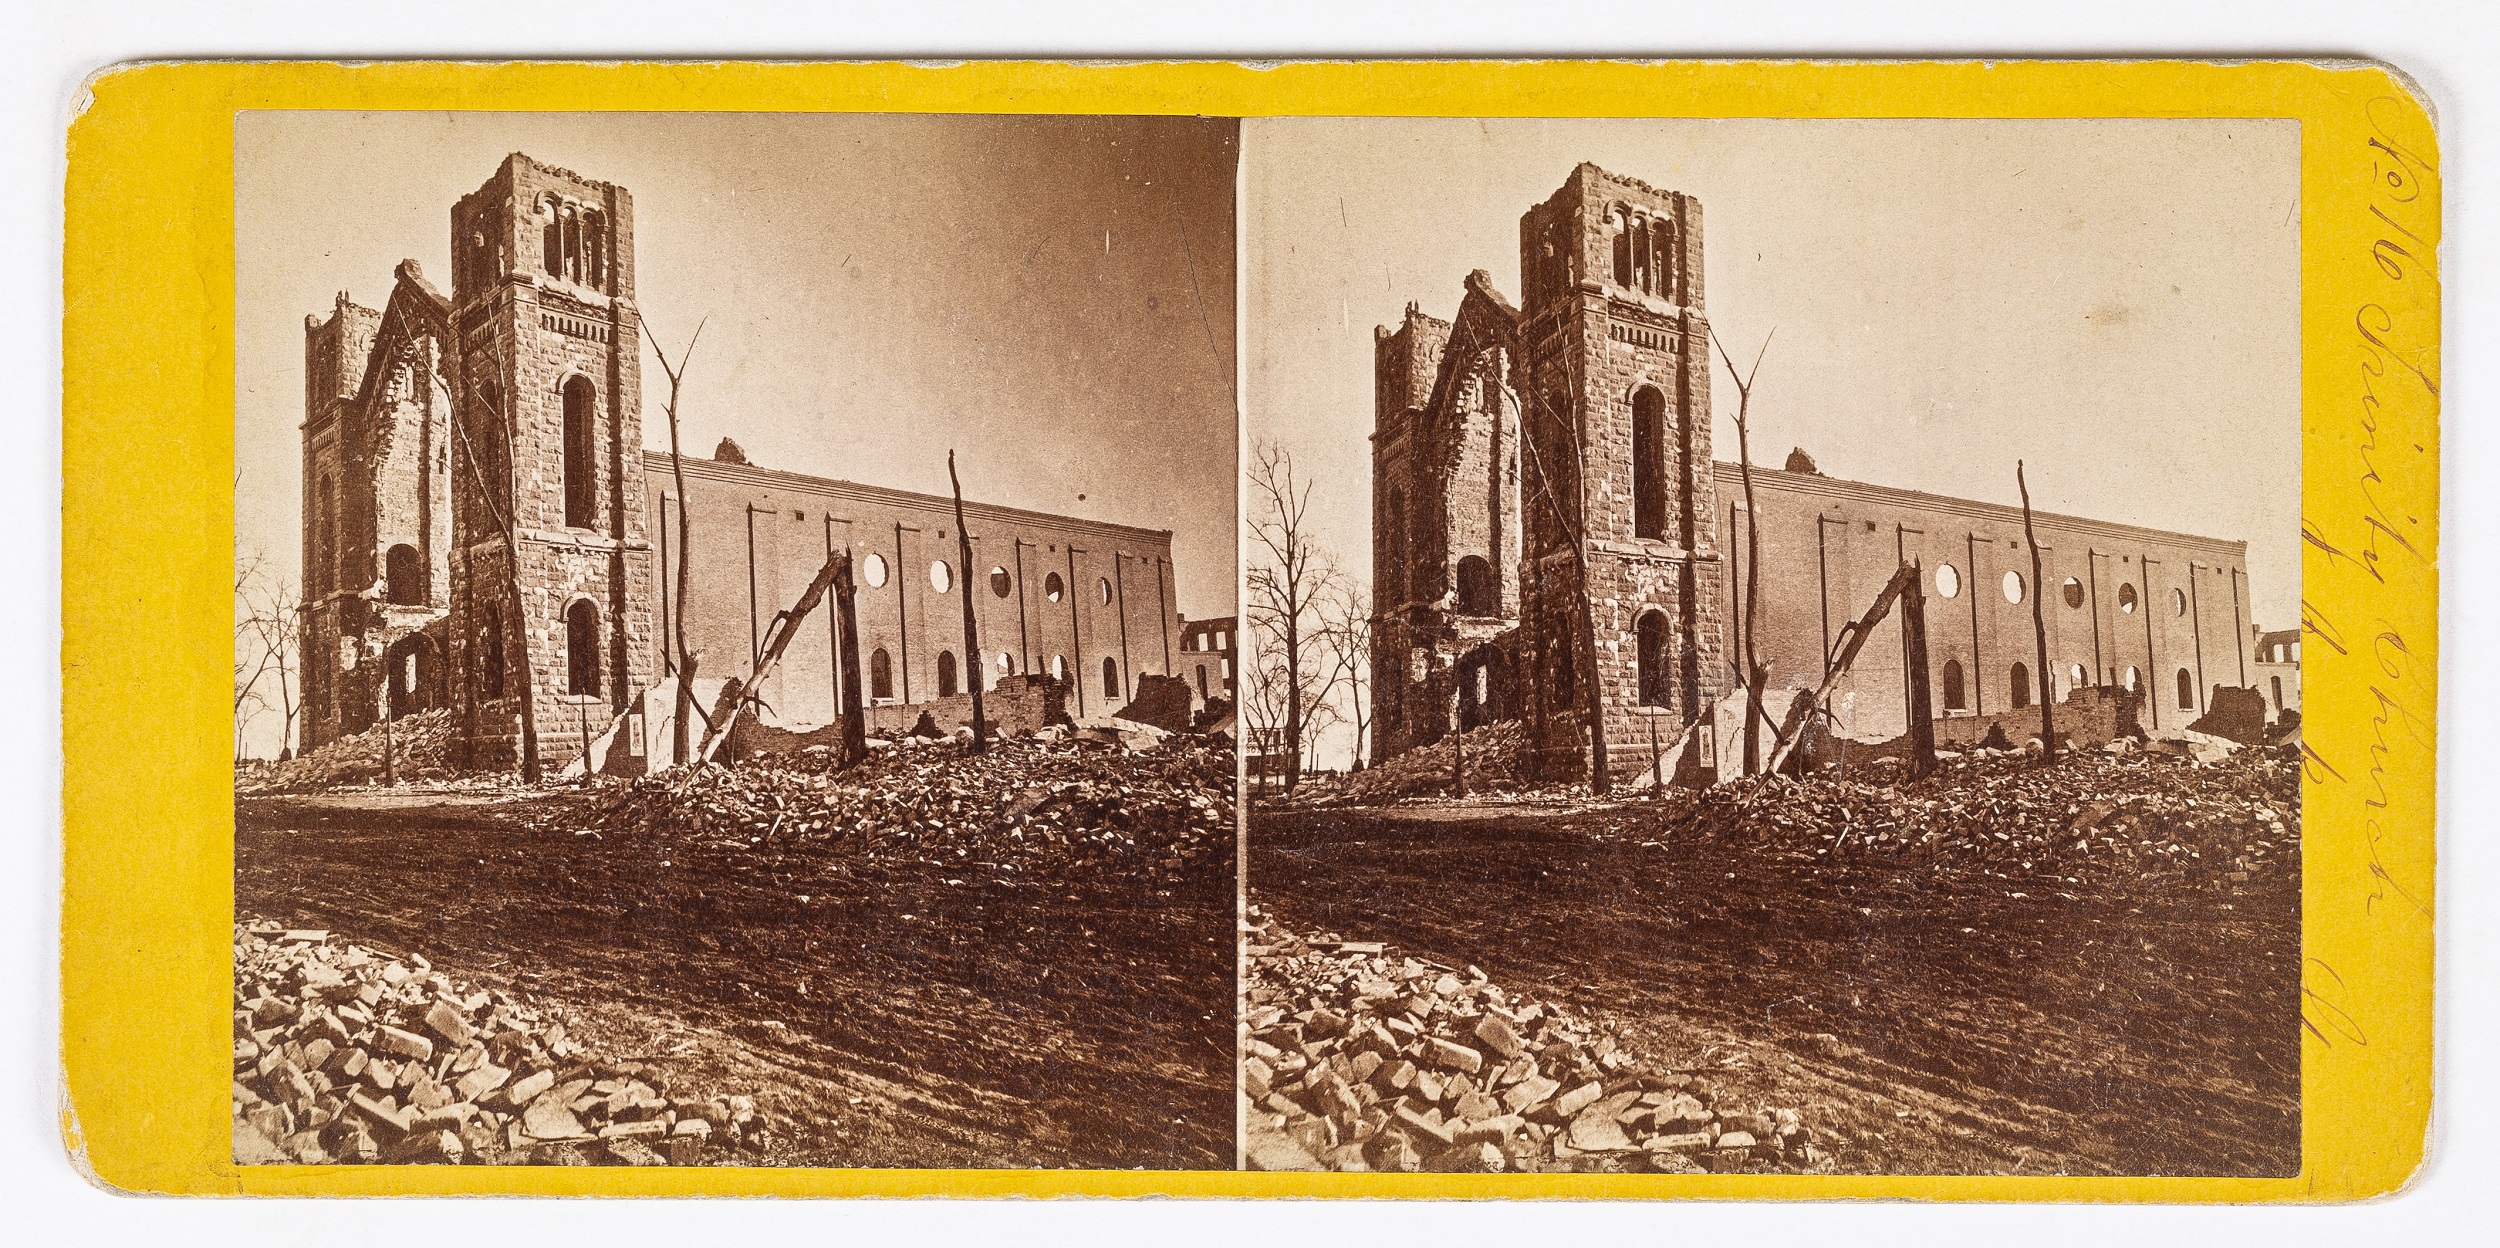 Photographic stereoview of a church building damaged by fire